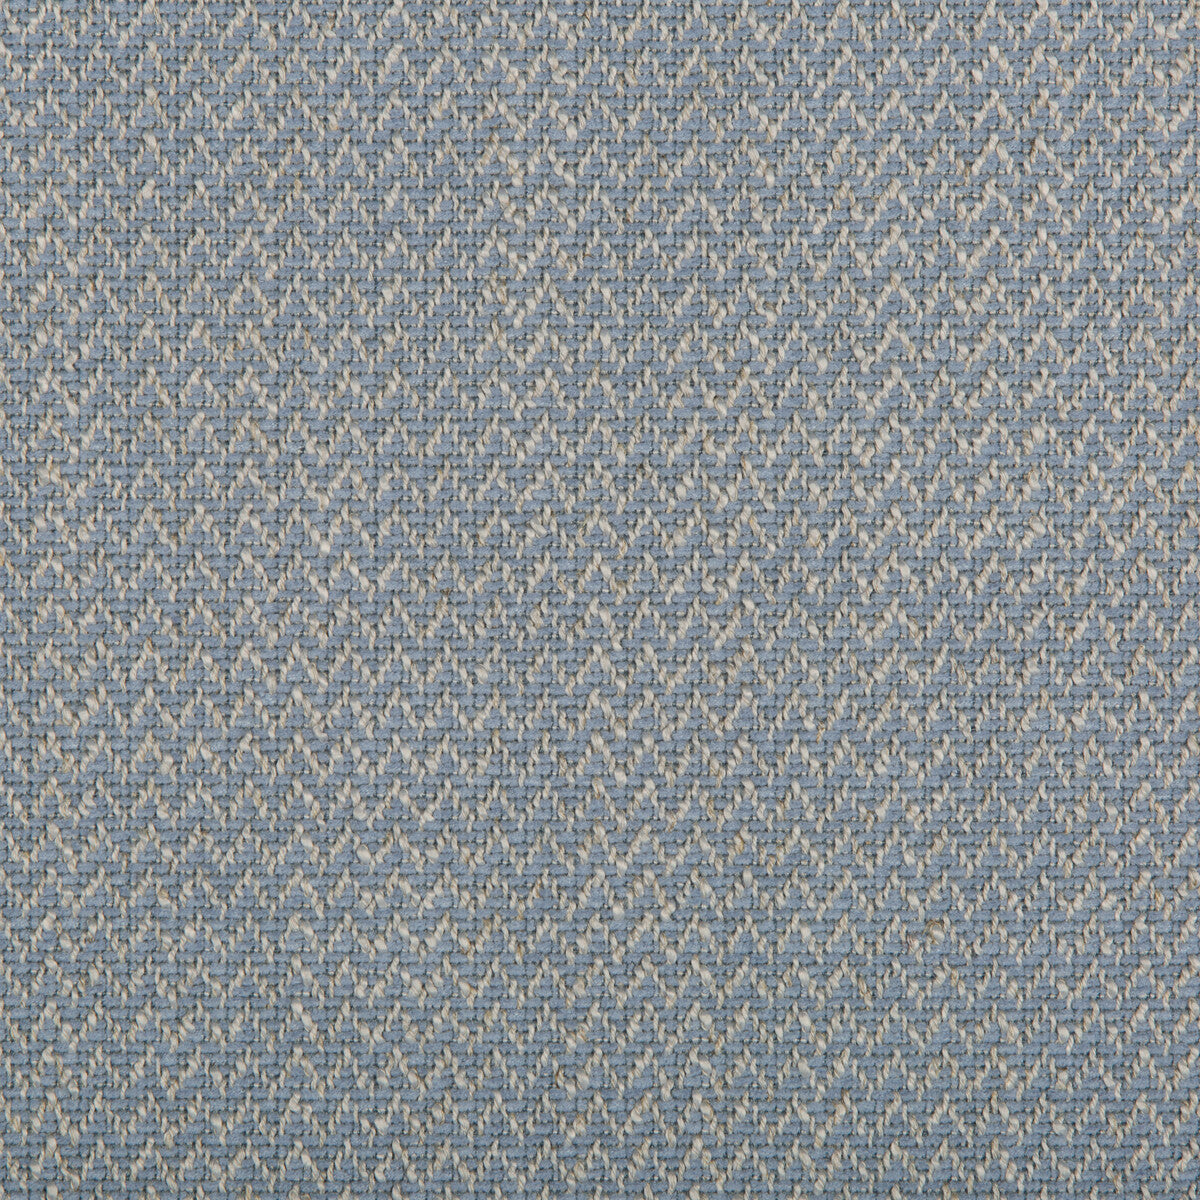 Kravet Smart fabric in 35394-5 color - pattern 35394.5.0 - by Kravet Smart in the Performance Crypton Home collection